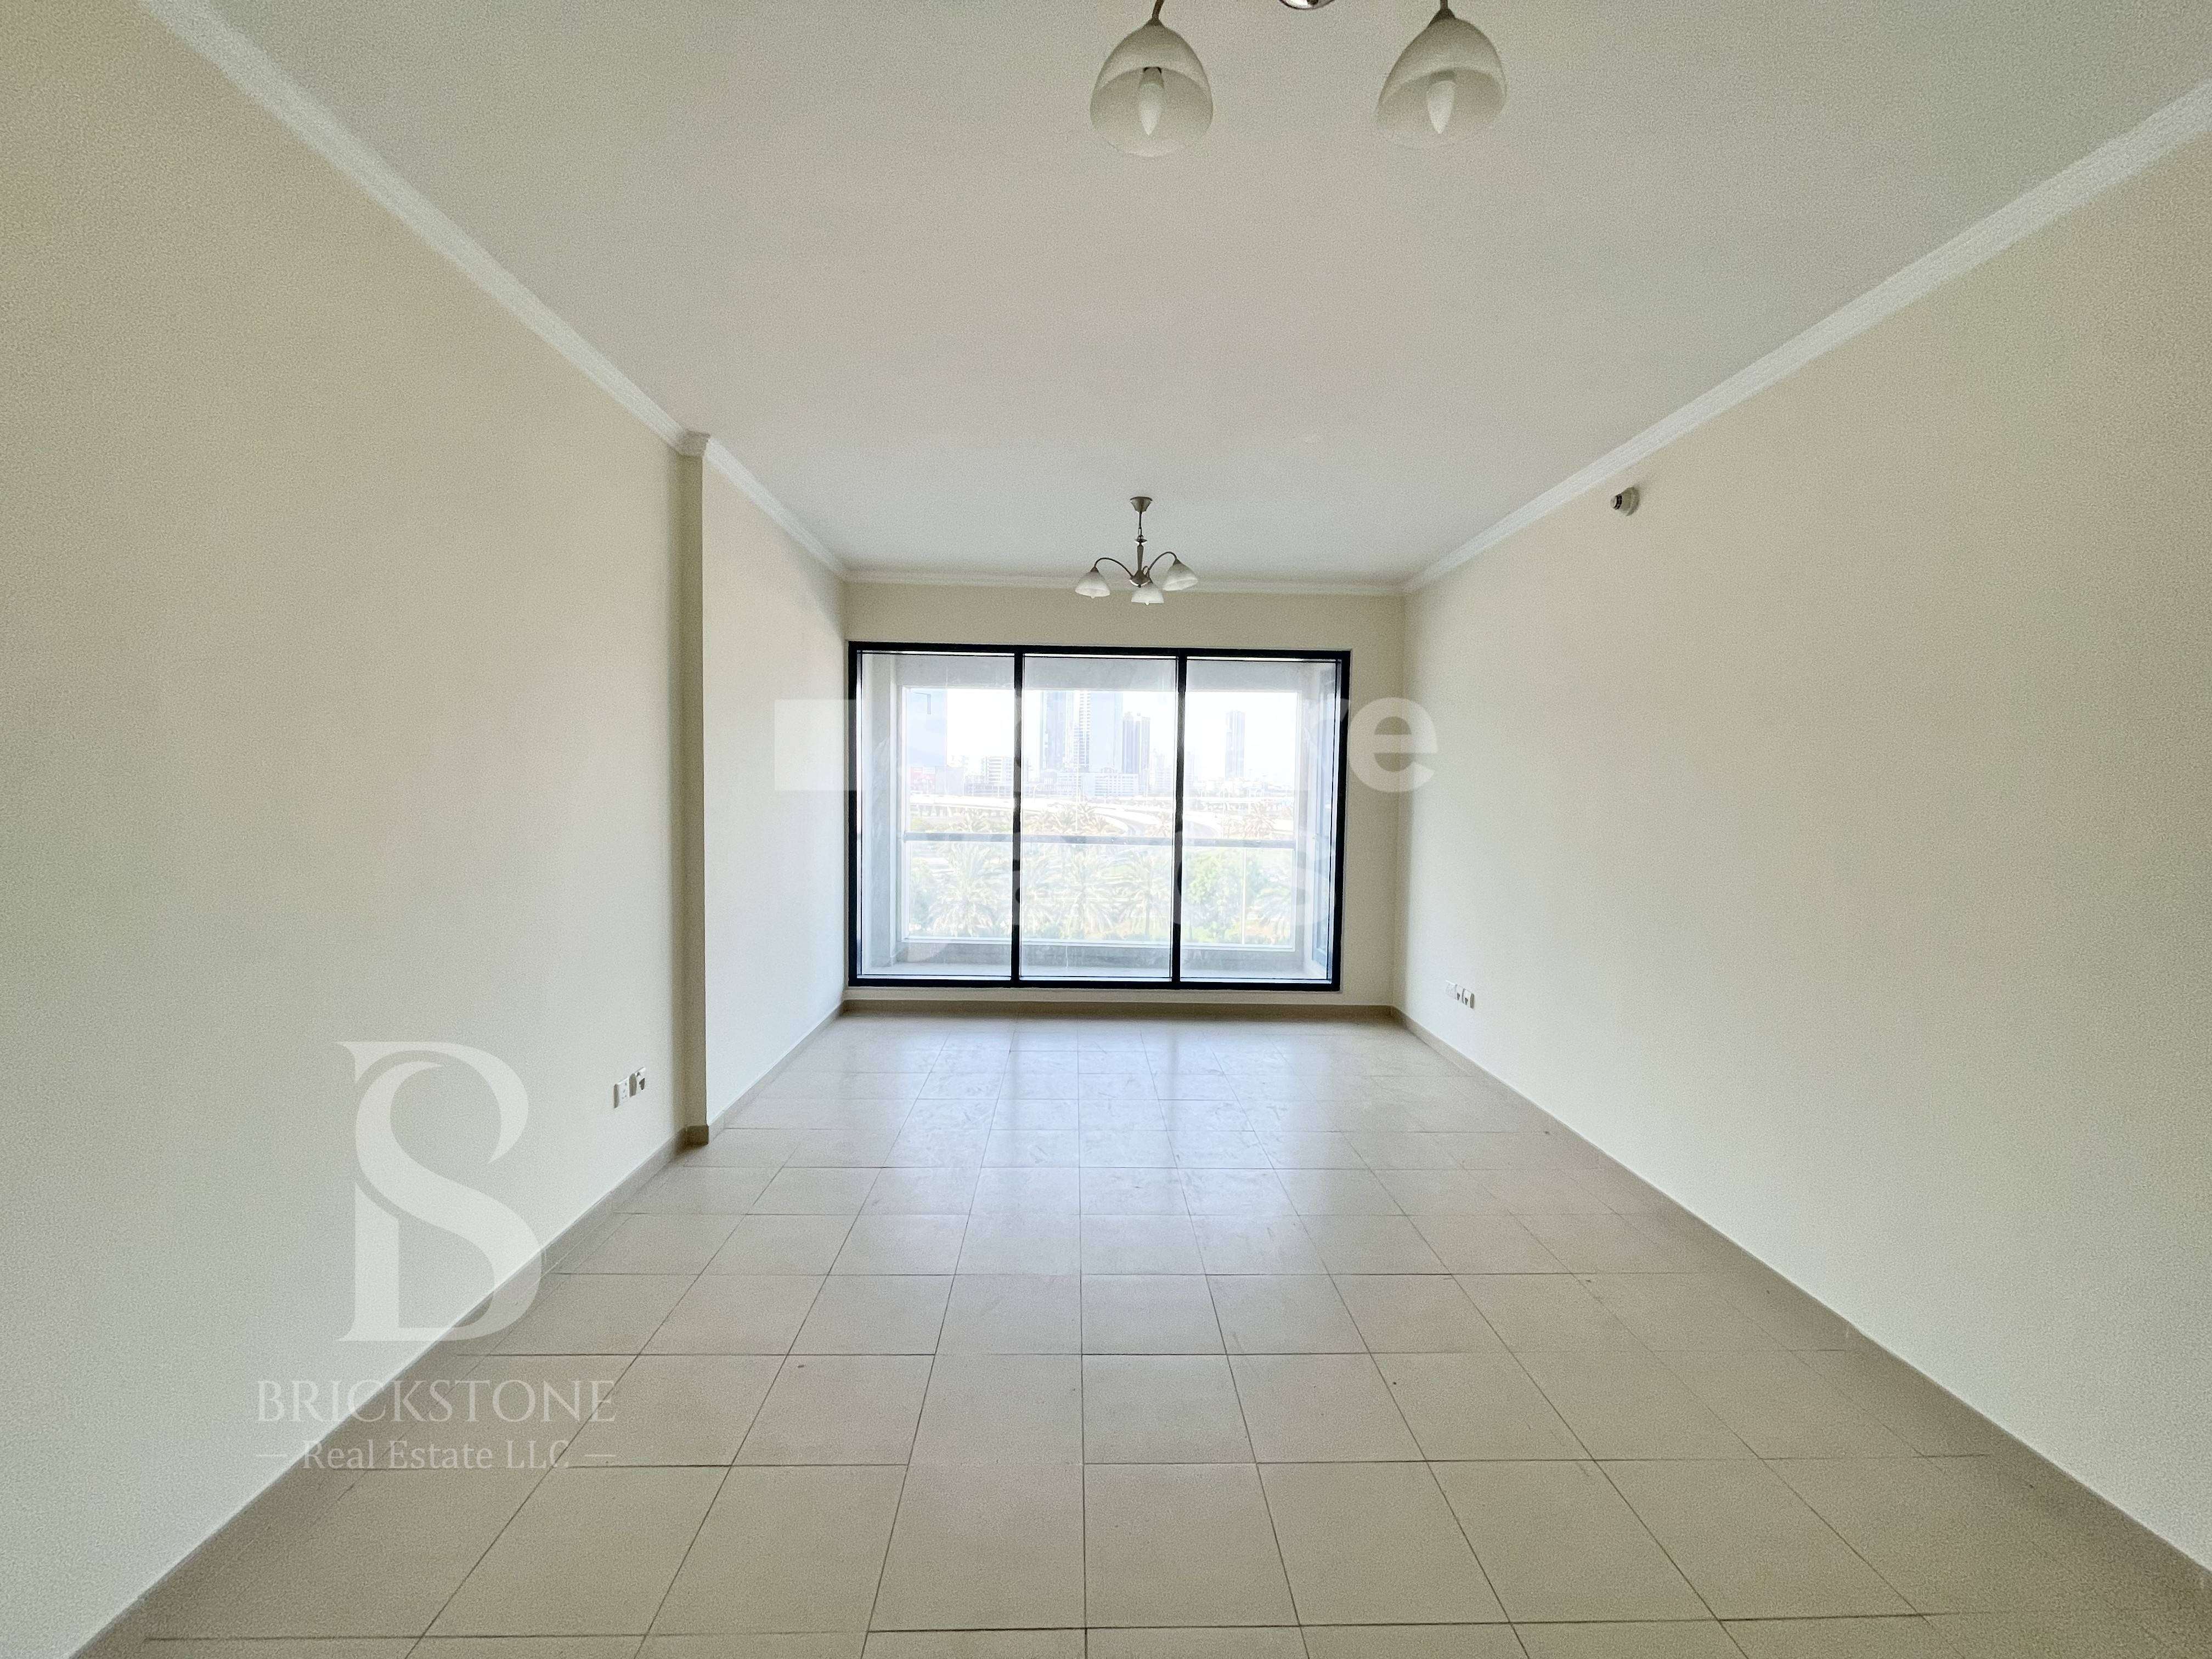 1 BR 854 Sq.Ft. Apartment in jumeirah bay x1